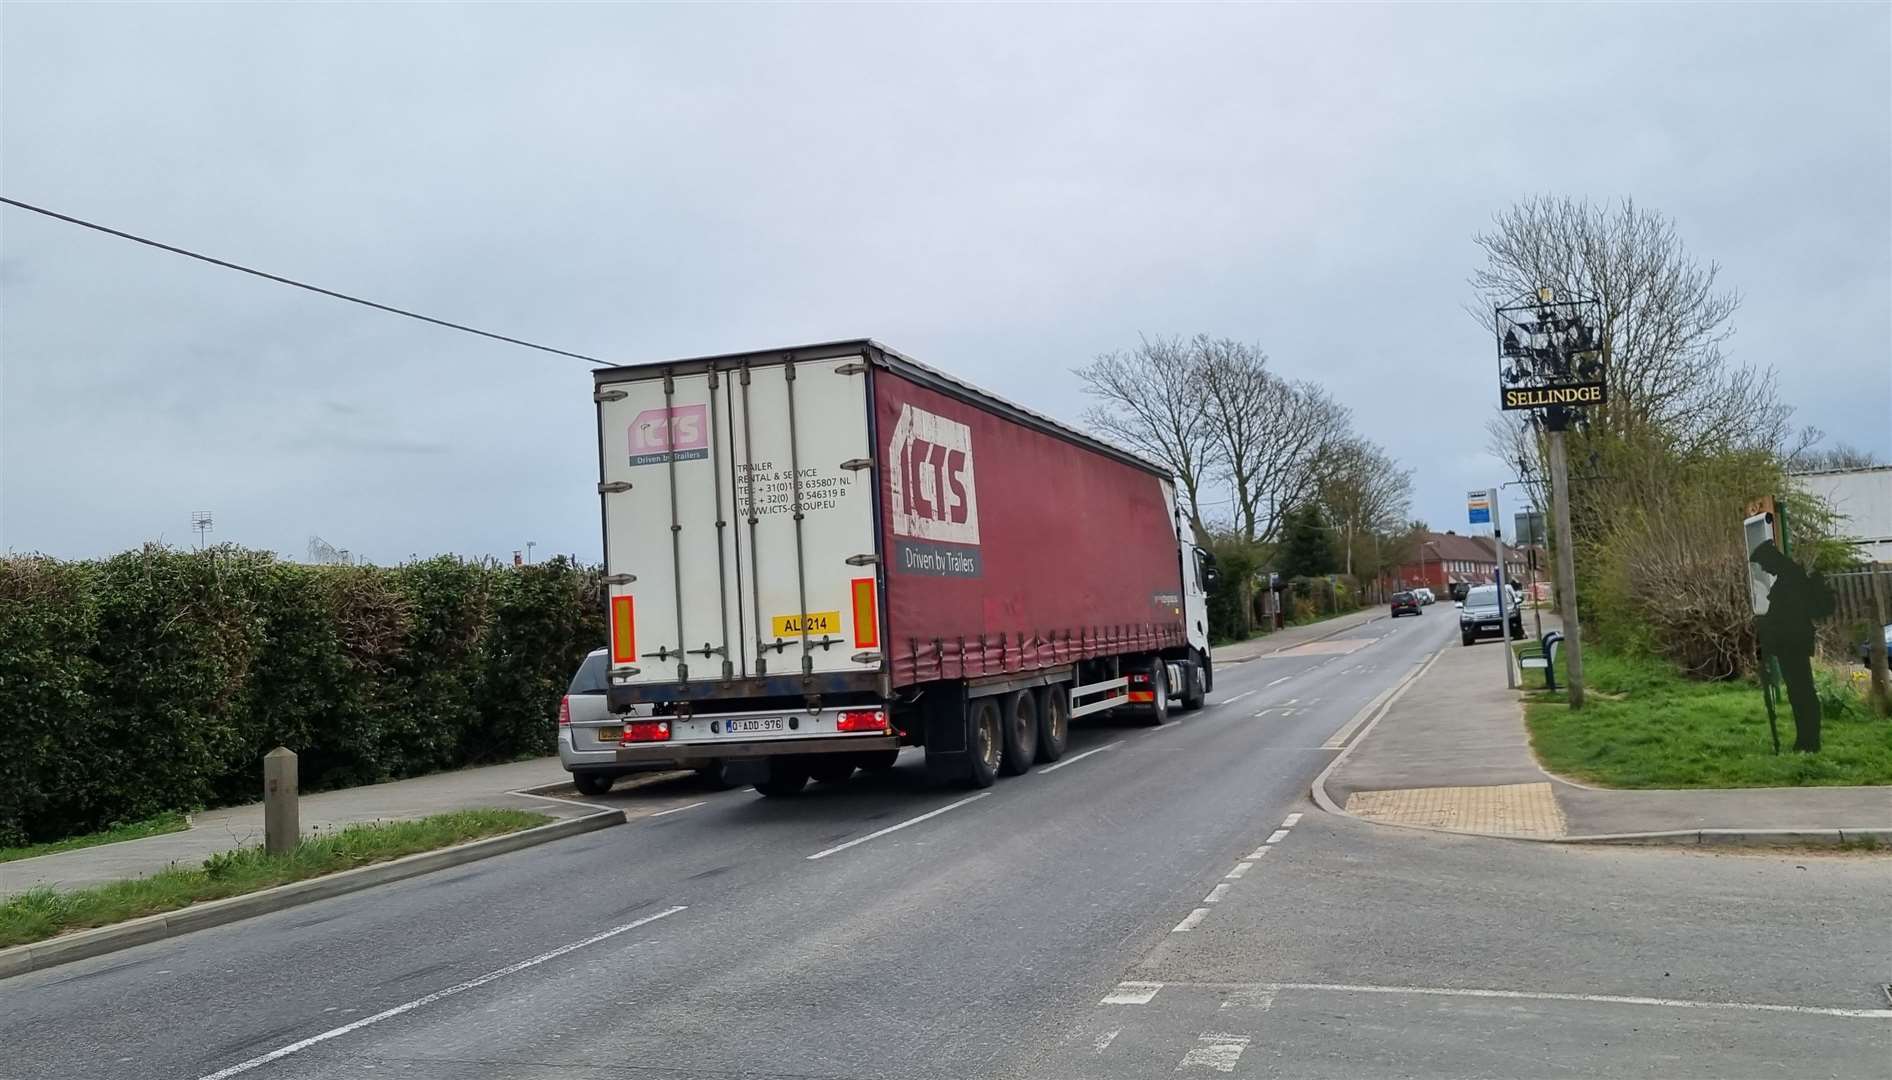 Lorries are using the A20 through Sellindge